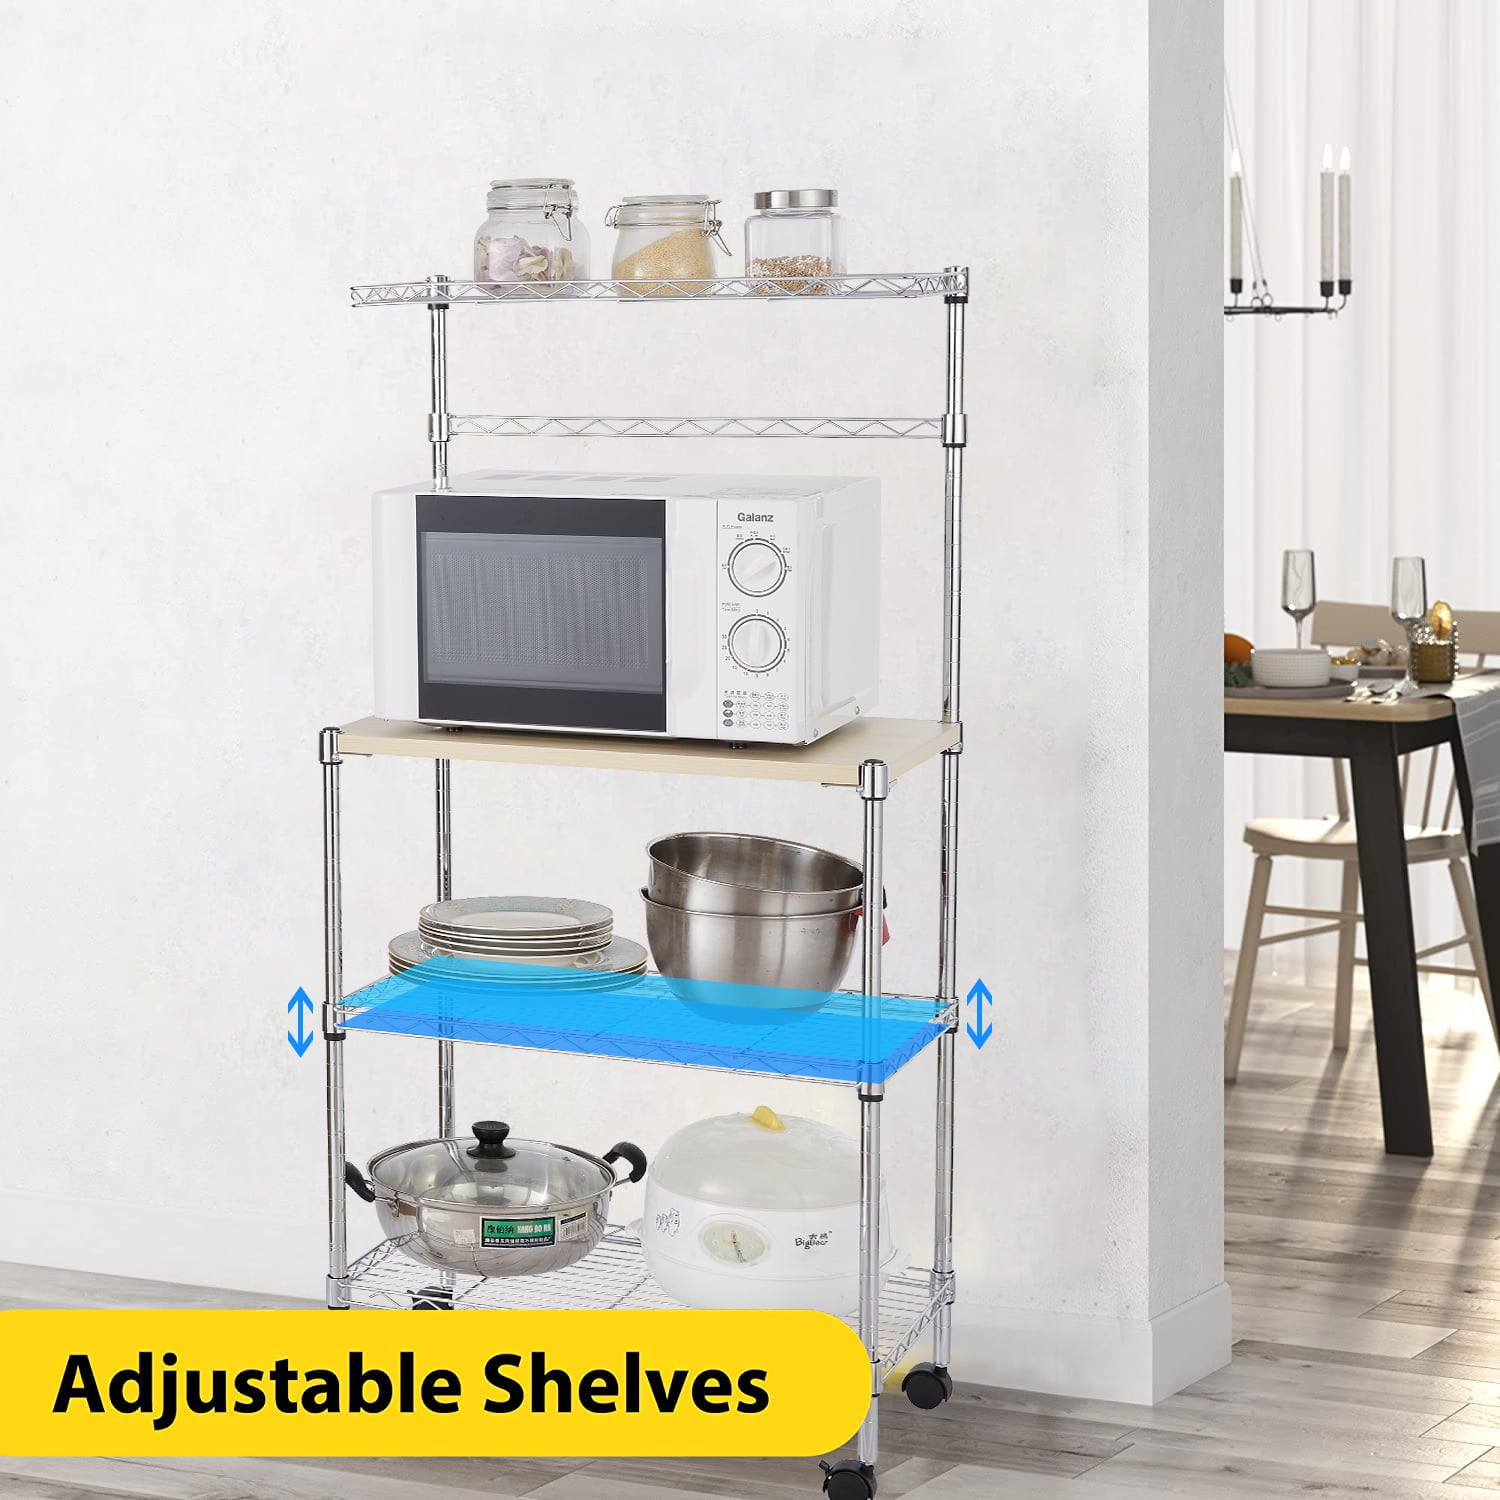 uhomepro Corner Bakers Rack， 4 Tier Kitchen Storage Microwave Rack， Microwave Cart with Cutting Board， Bakers Racks for Microwave， Silver Metal Storage Shelves